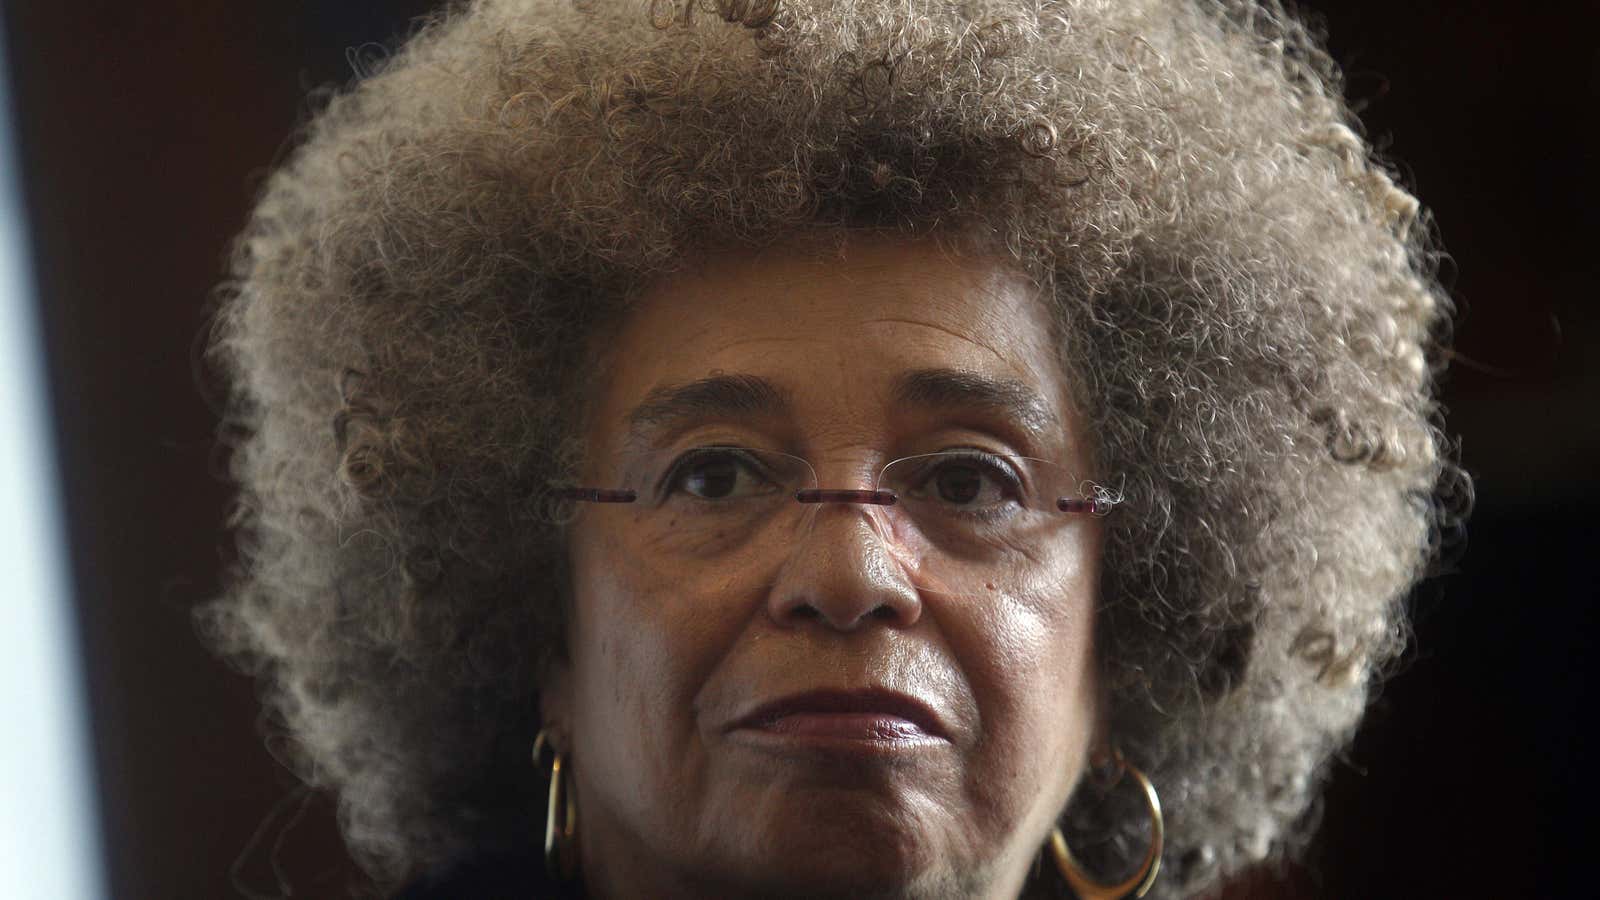 Political activist and academic and Angela Davis is celebrity in South Africa.